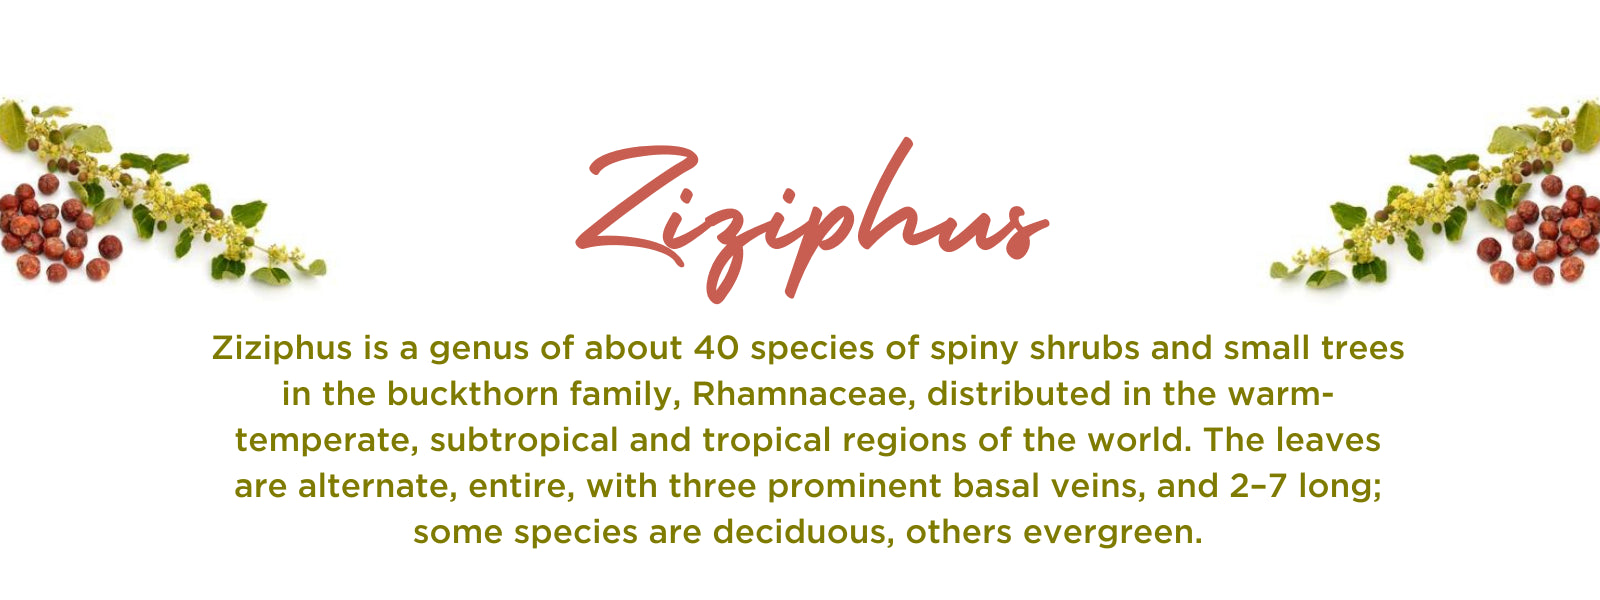 Ziziphus - Health Benefits, Uses and Important Facts